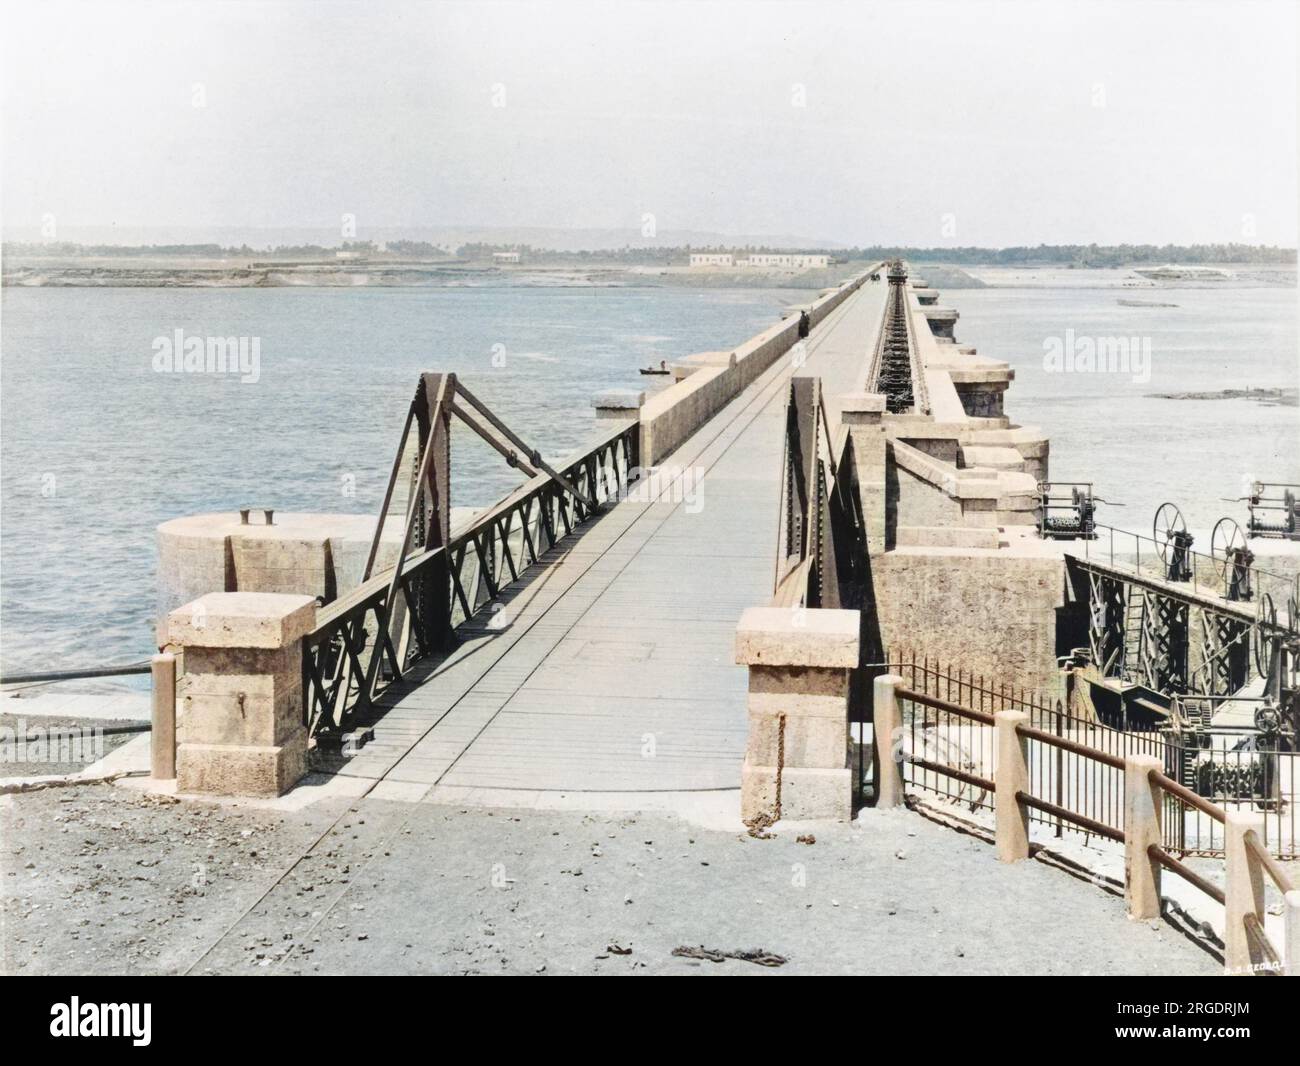 Roadway and swing bridge over lock on the Assiut or Asyut Barrage on the River Nile in Egypt, about 350 miles downstream from the Aswan Dam. Stock Photo